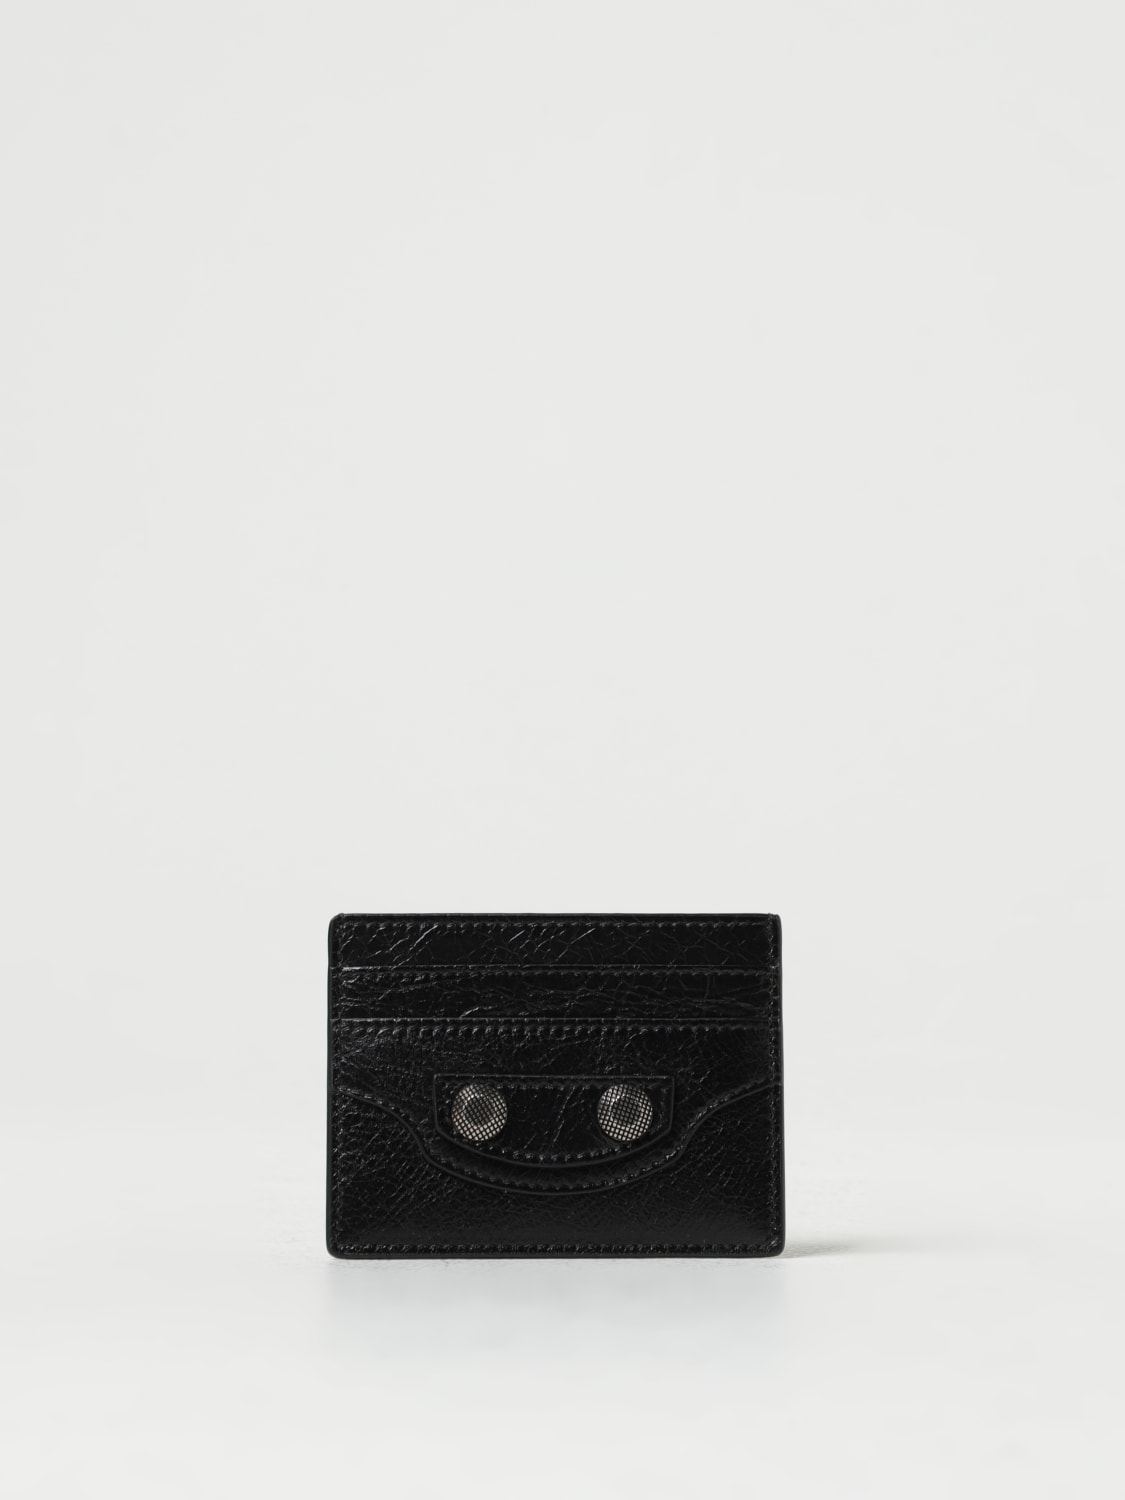 Neo Classic Card Holder in Black